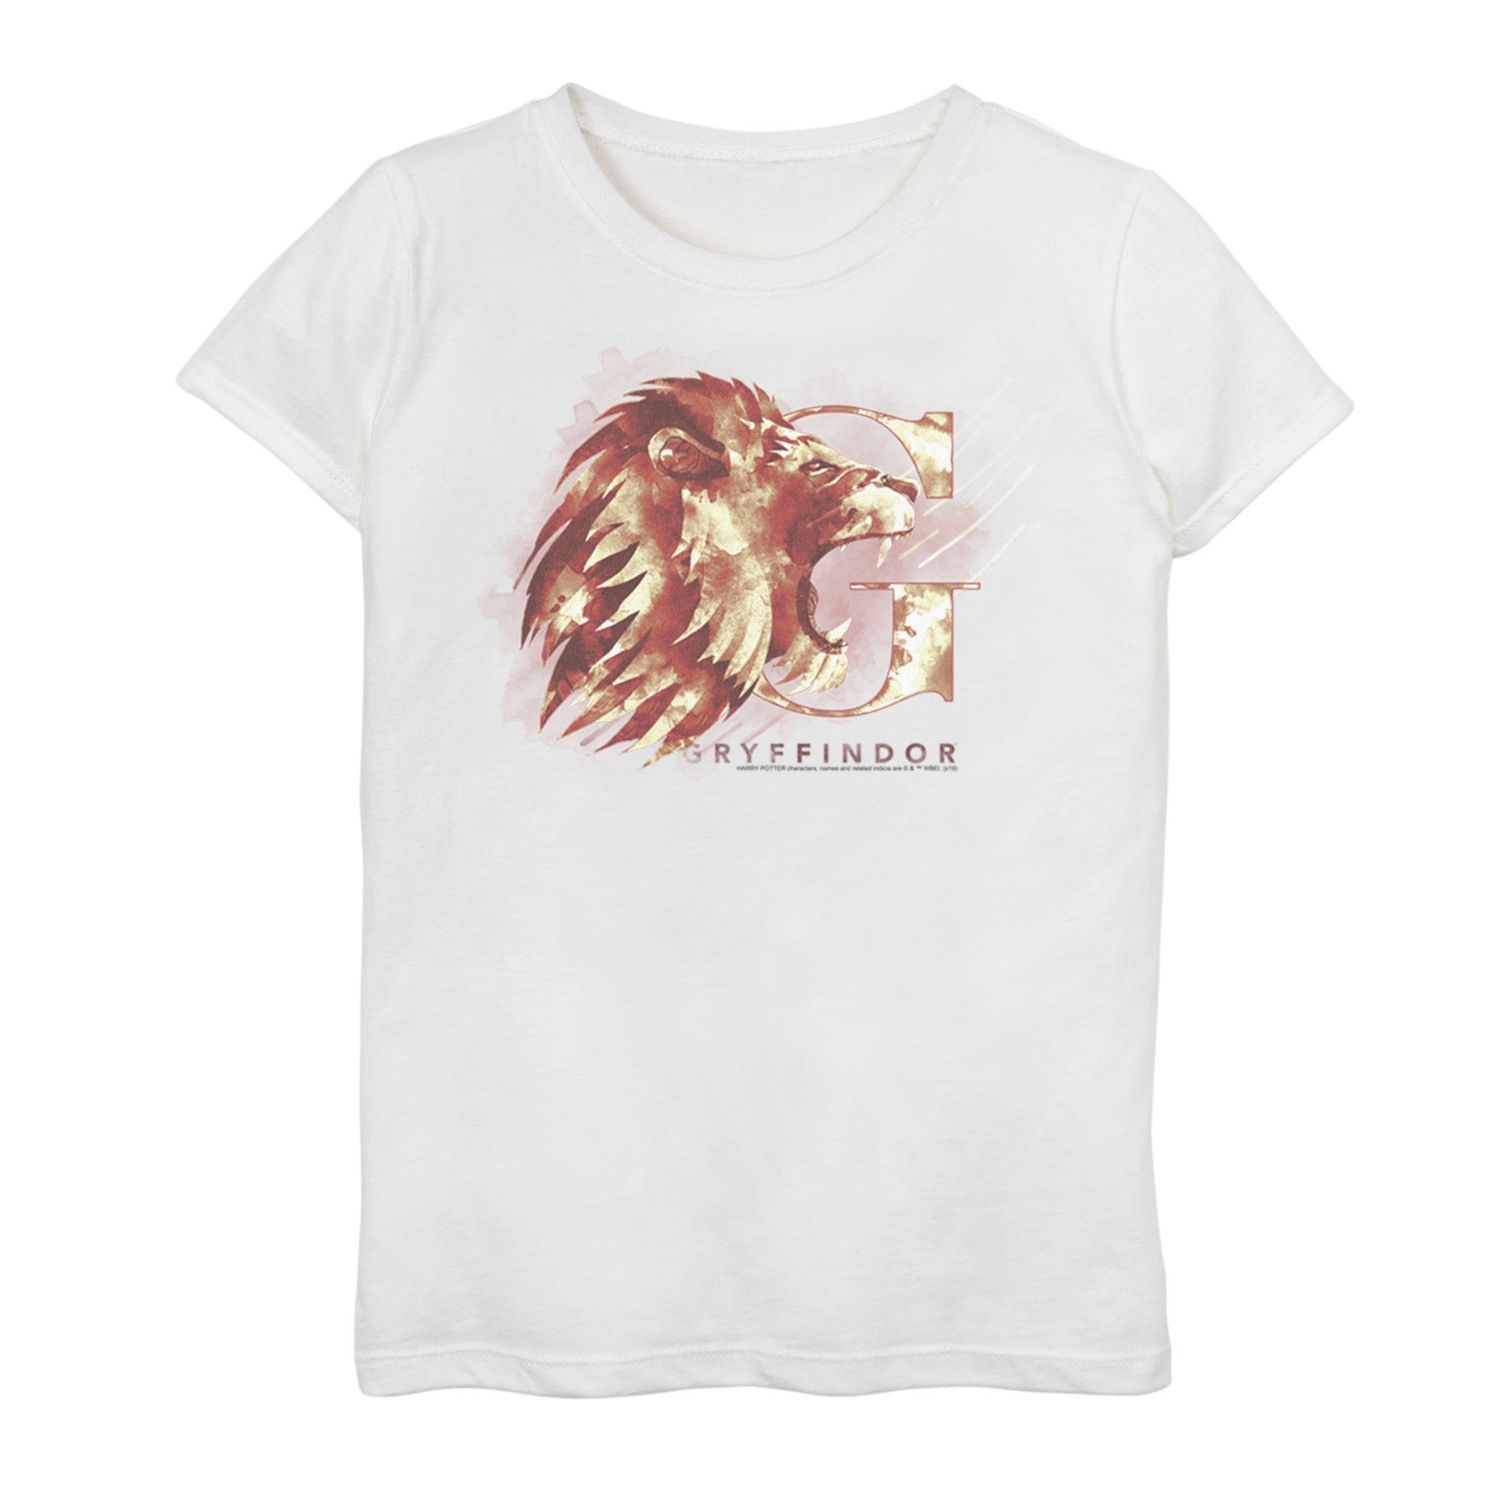 Image for Harry Potter Girls 7-16 Gryffindor House Watercolor Graphic Tee at Kohl's.